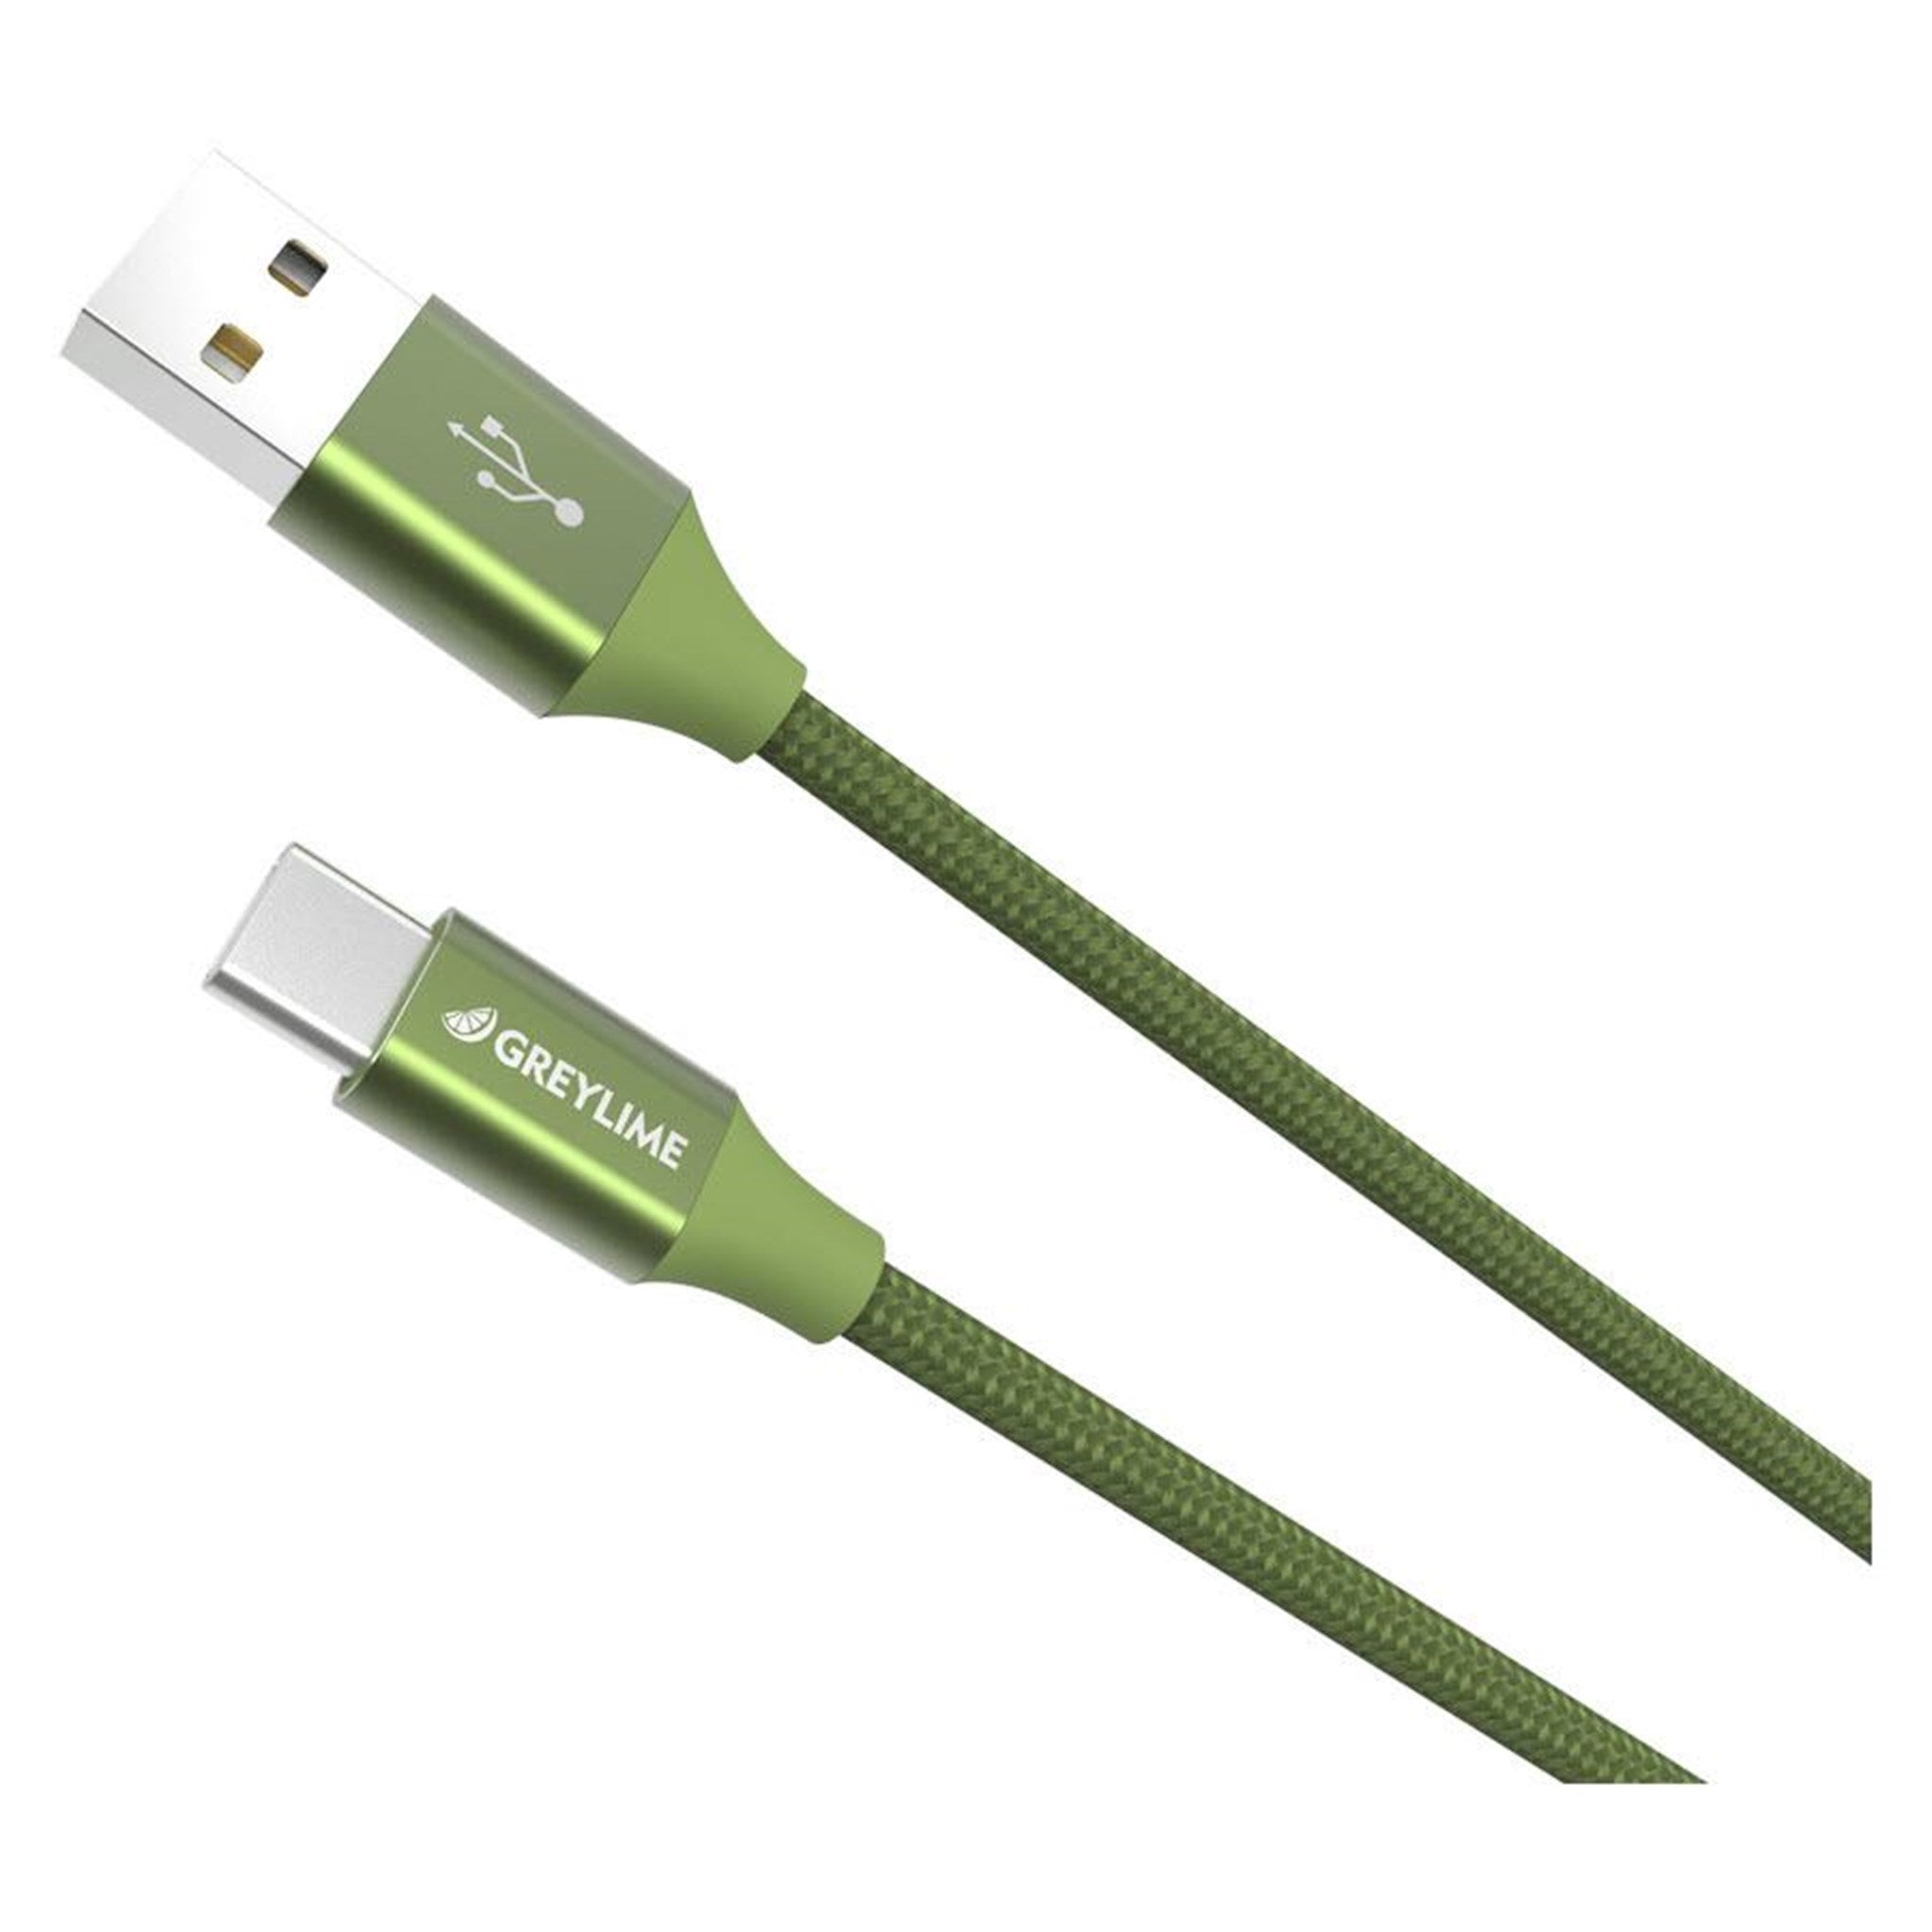 C21AC2M03-GreyLime-Braided-USB-A-to-USB-C-Cable-Groen-2-m_02.jpg